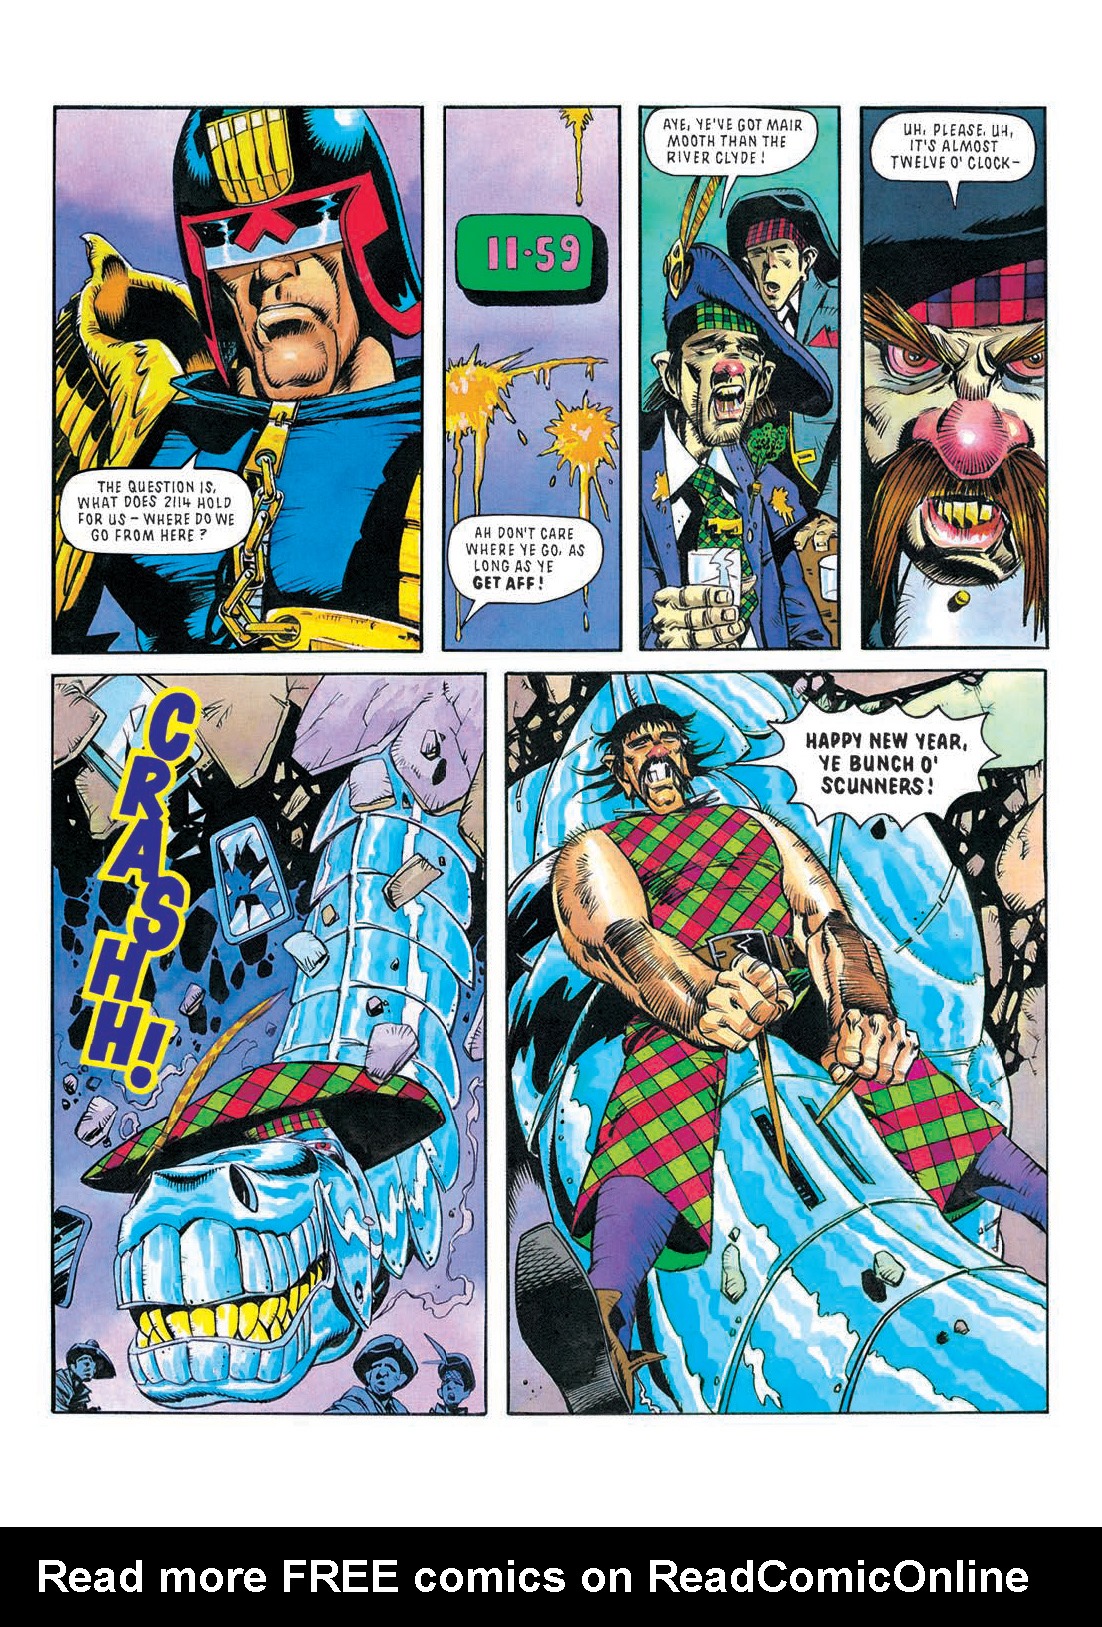 Read online Judge Dredd: The Restricted Files comic -  Issue # TPB 3 - 119